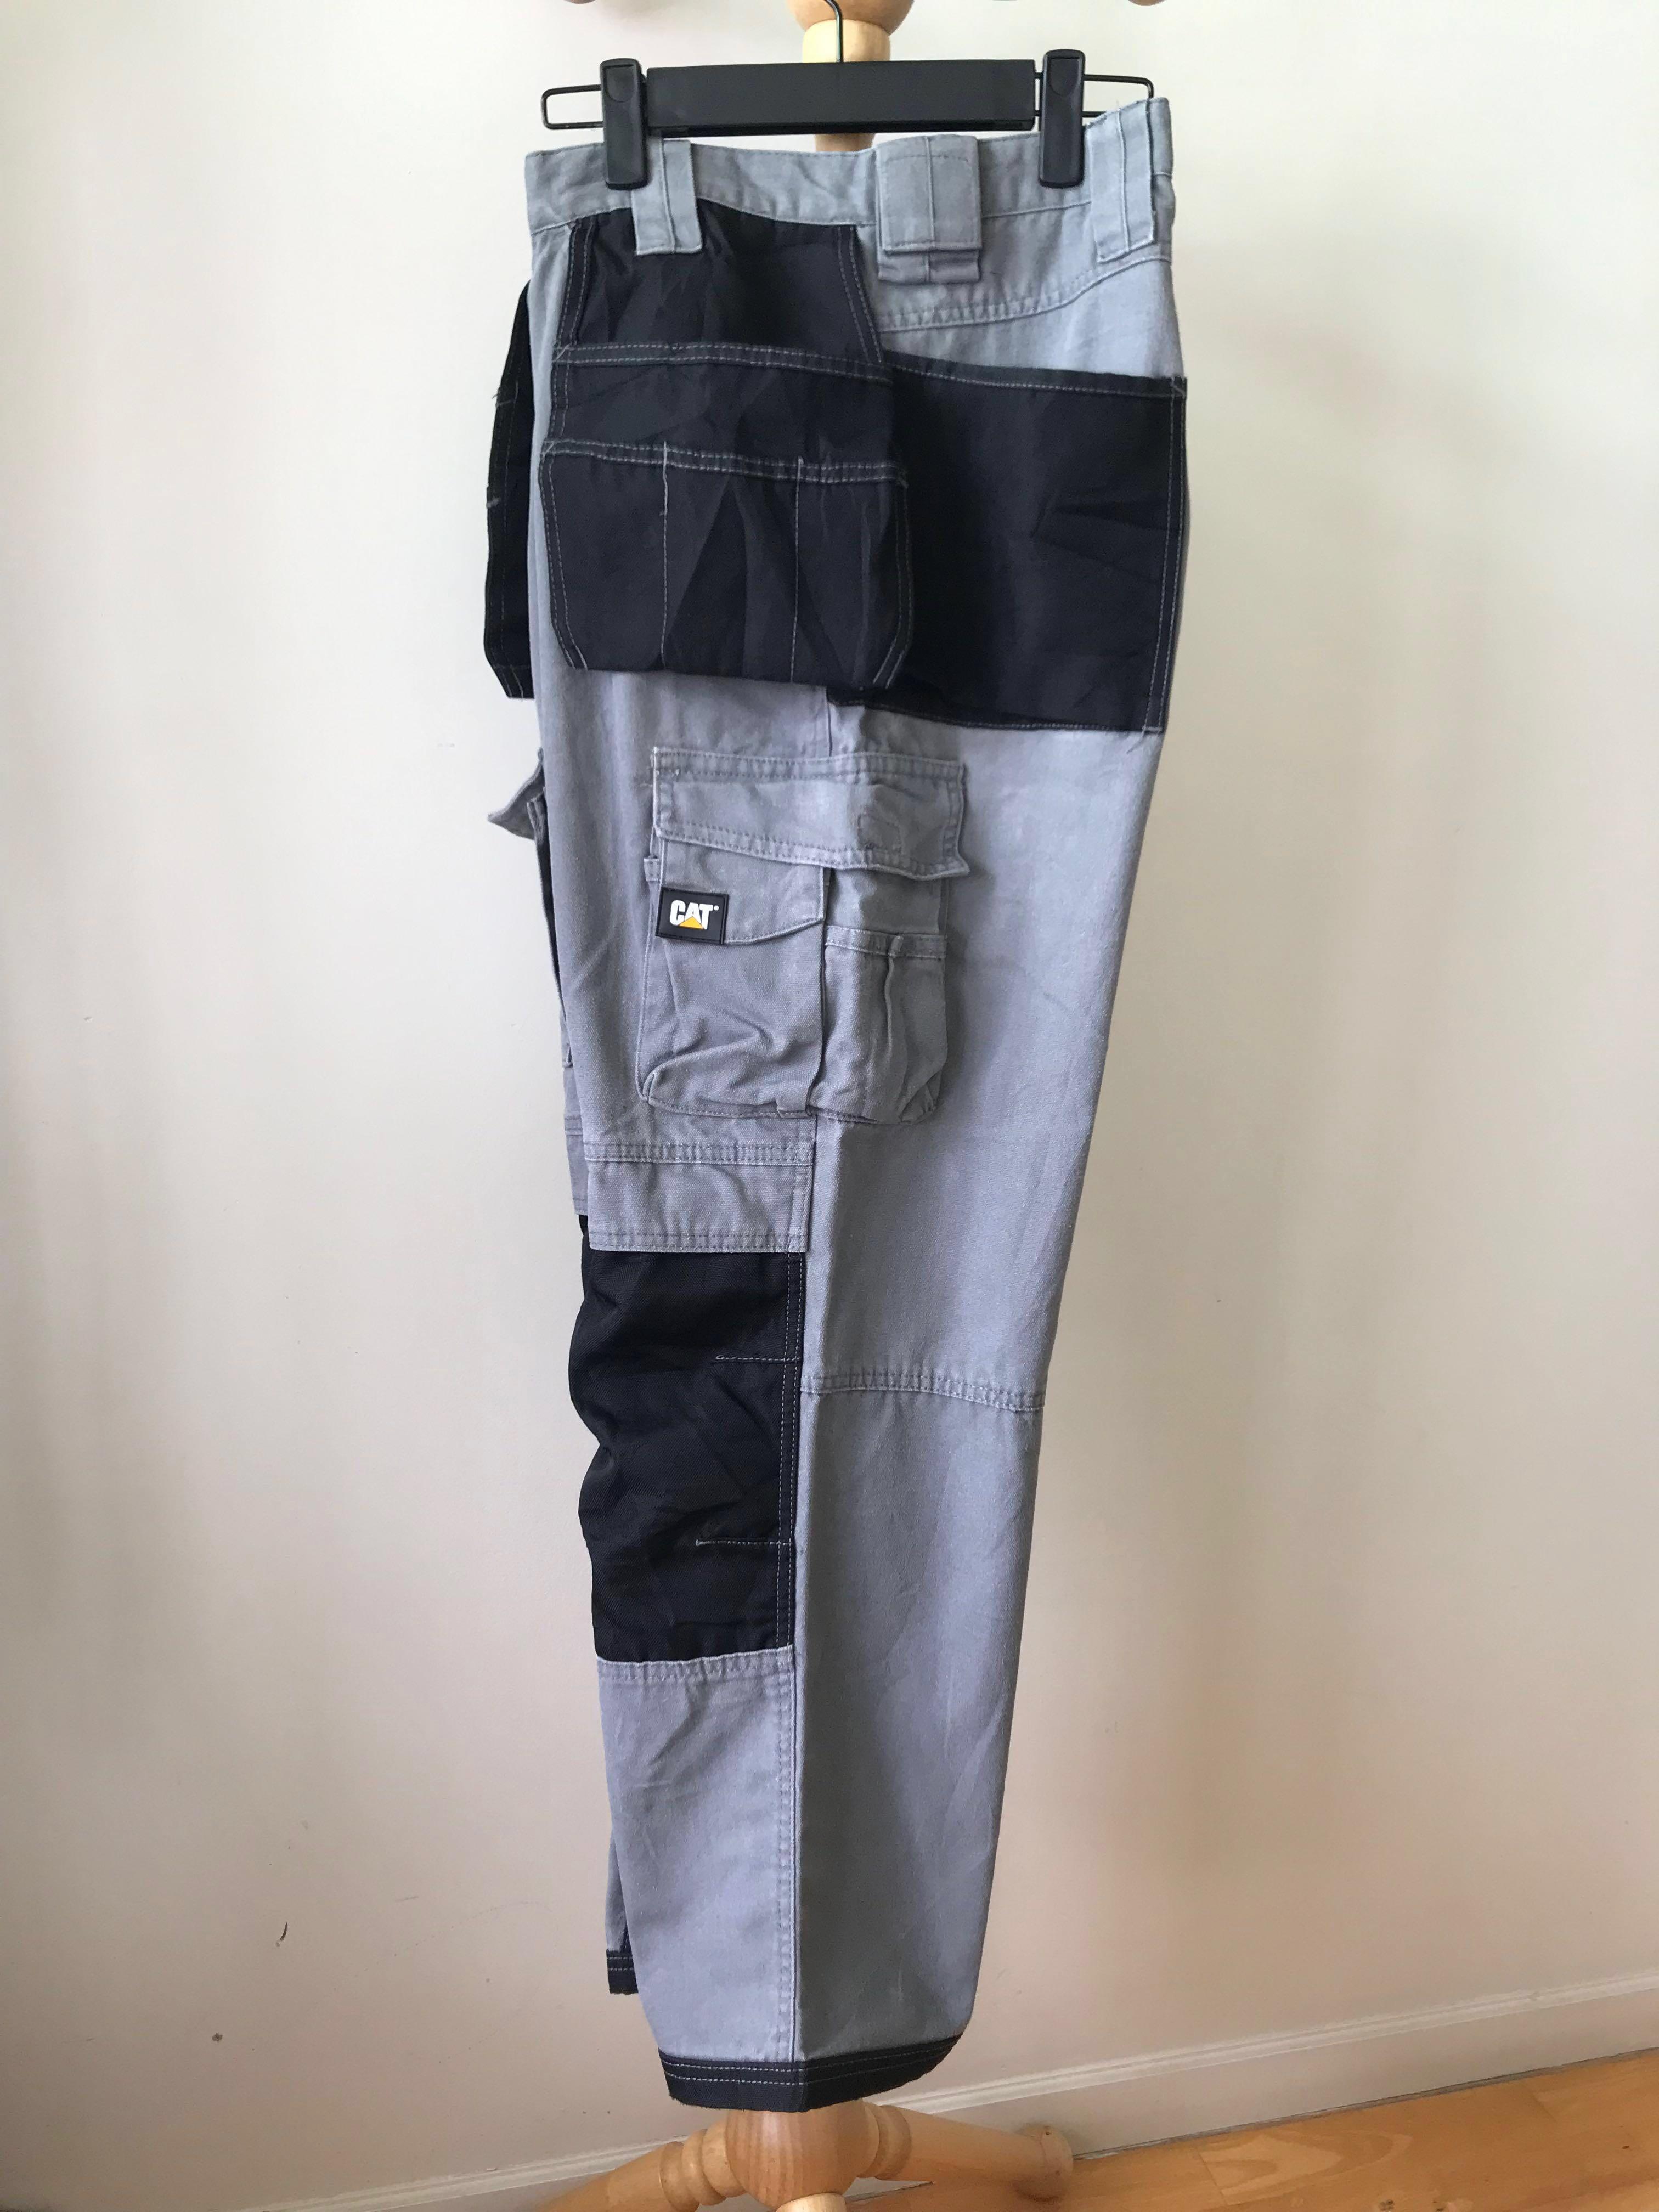 The Dynamic Pant From Cat Workwear  Caterpillar Workwear